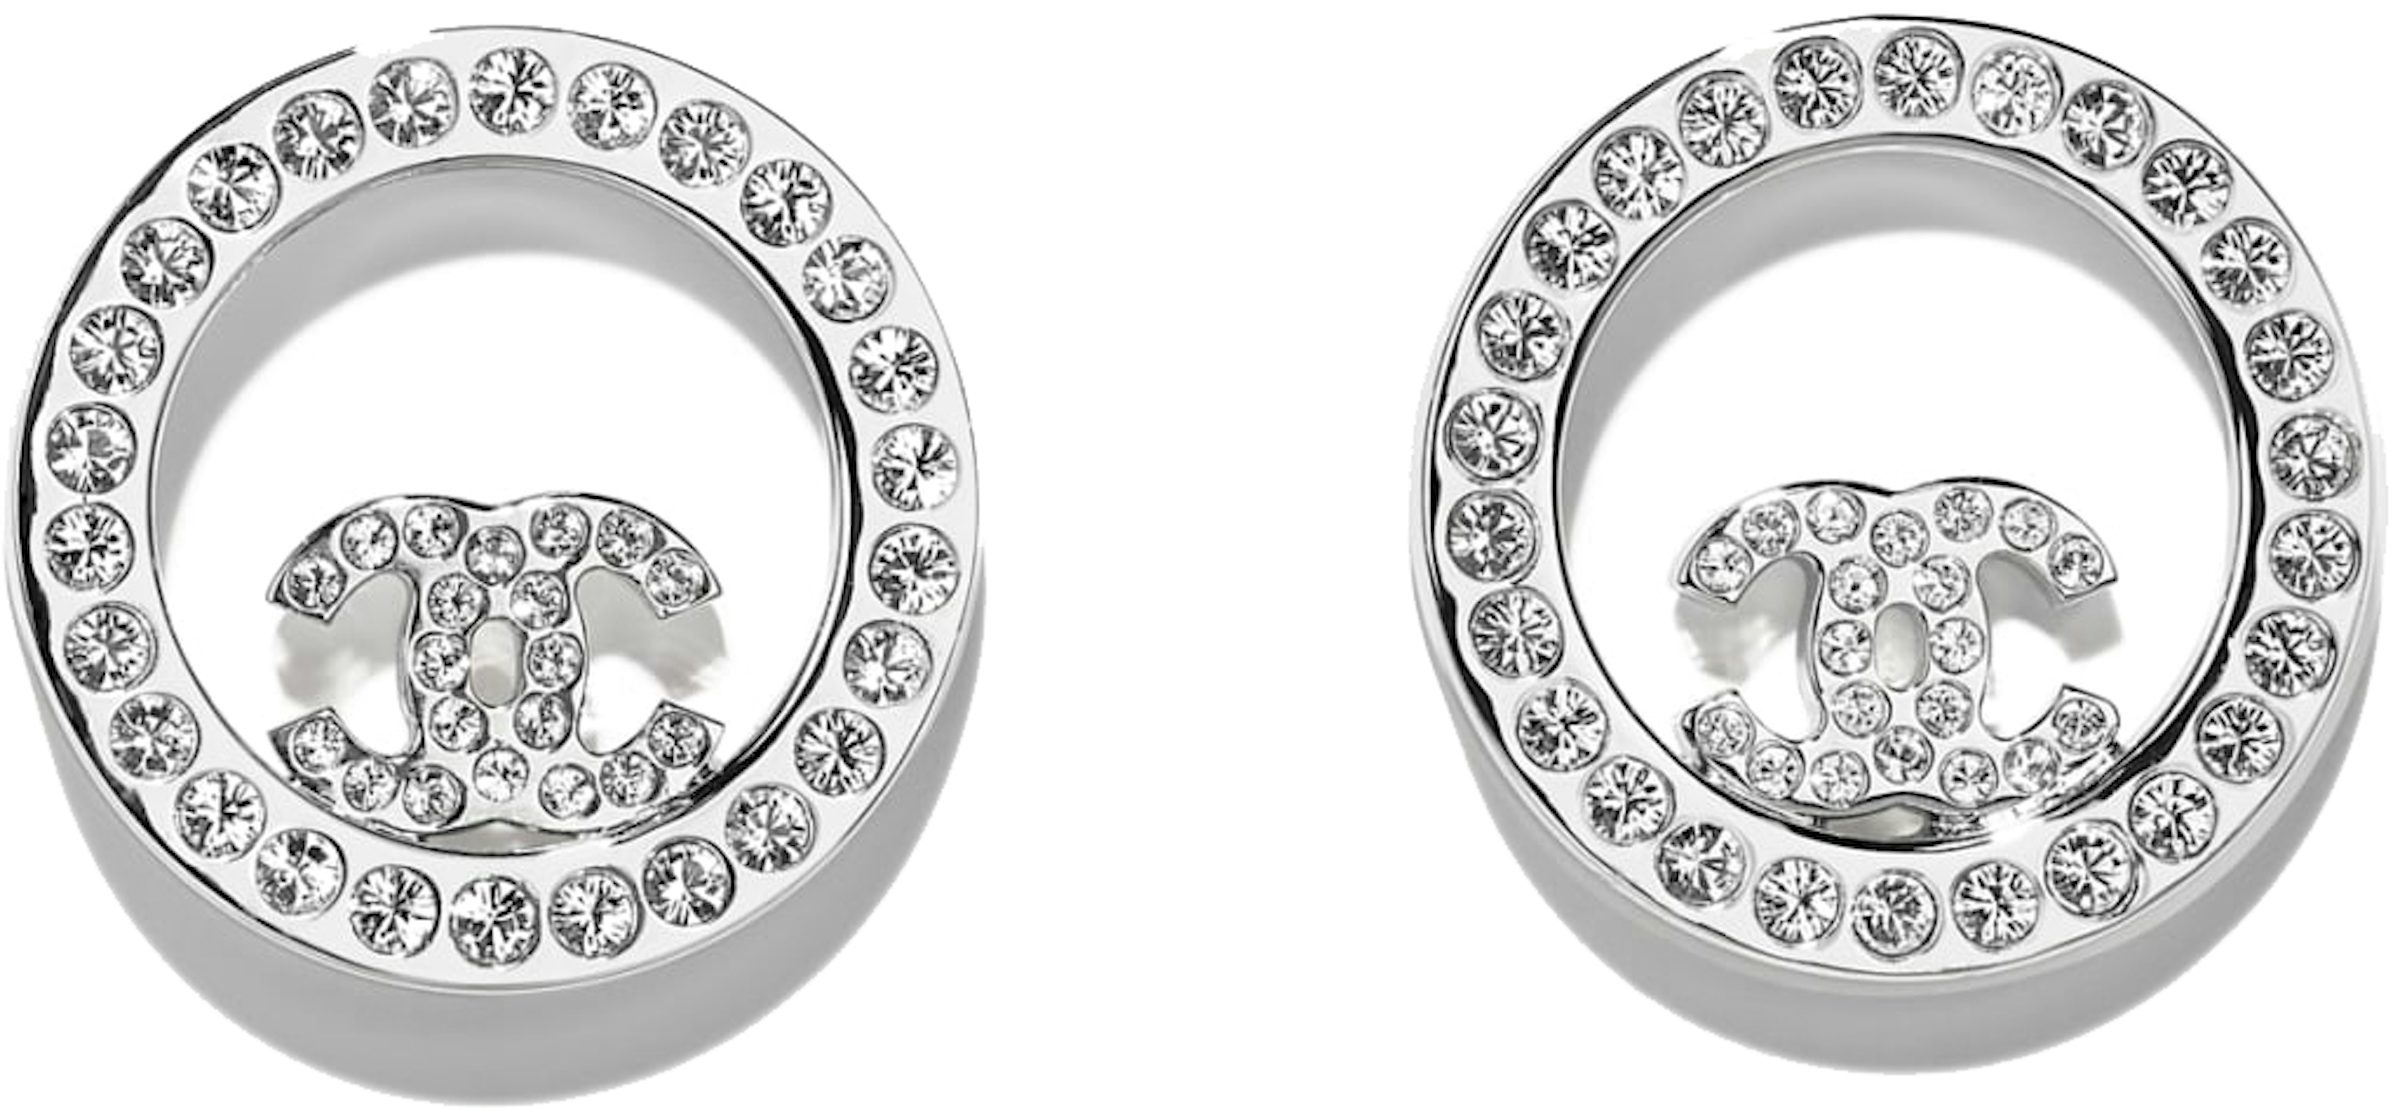 Chanel Classic Earrings Silver/Crystal